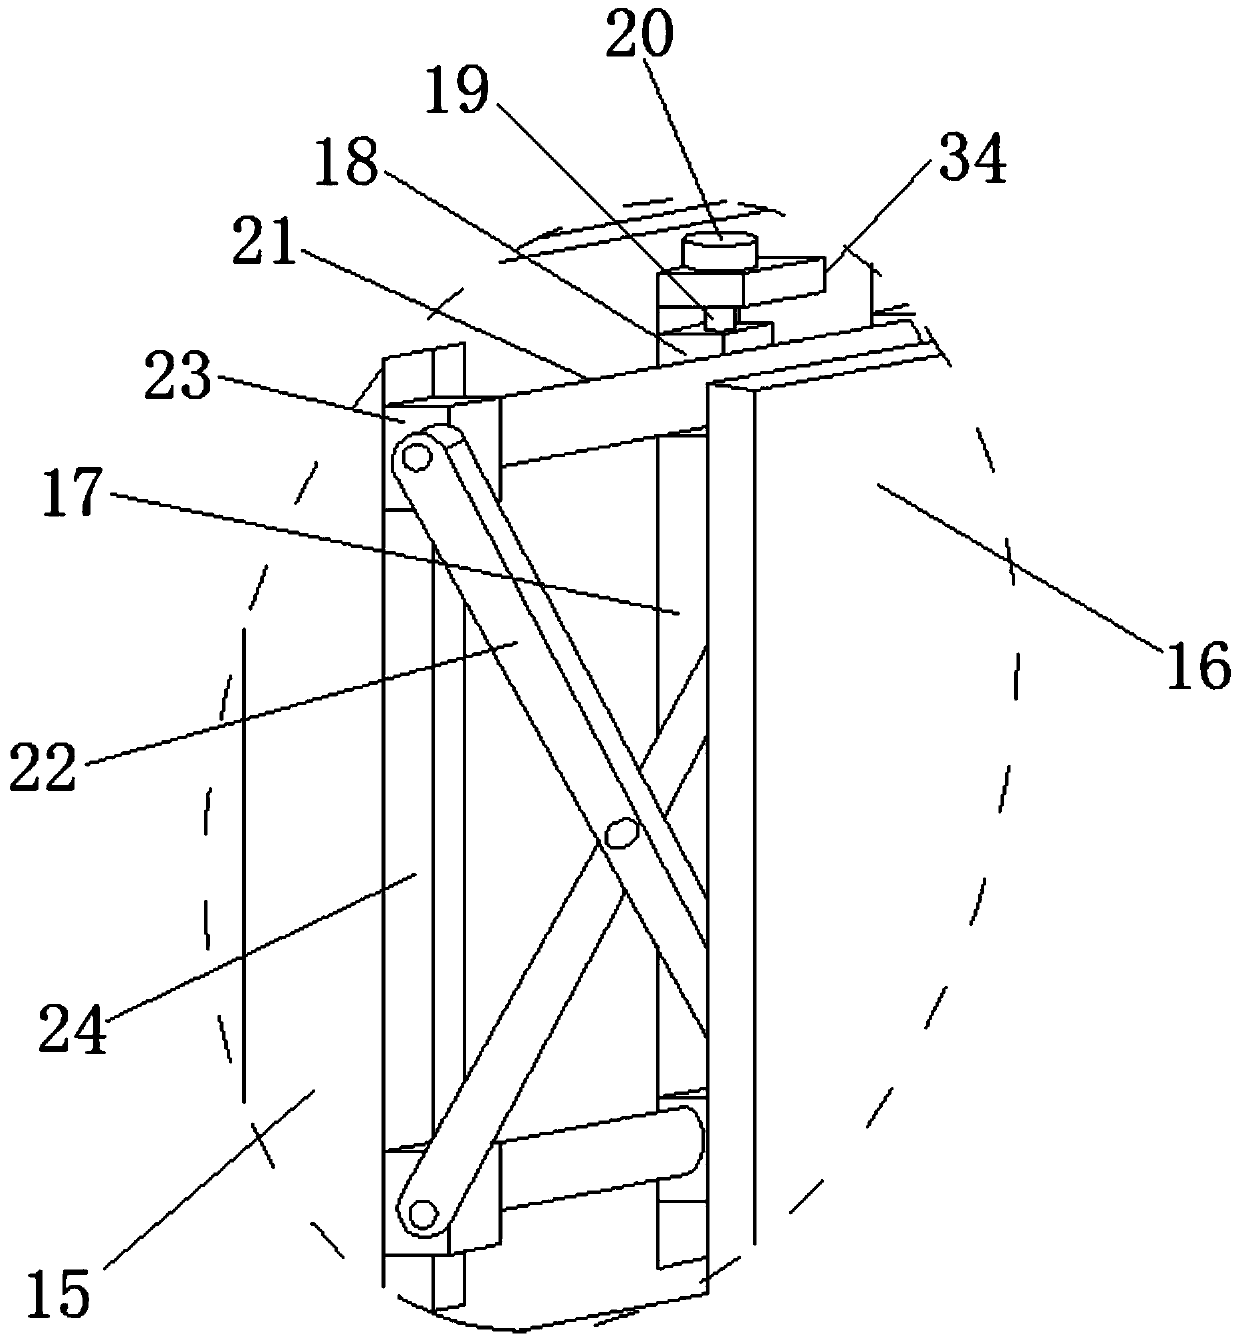 Supporting system for installing fabricated building